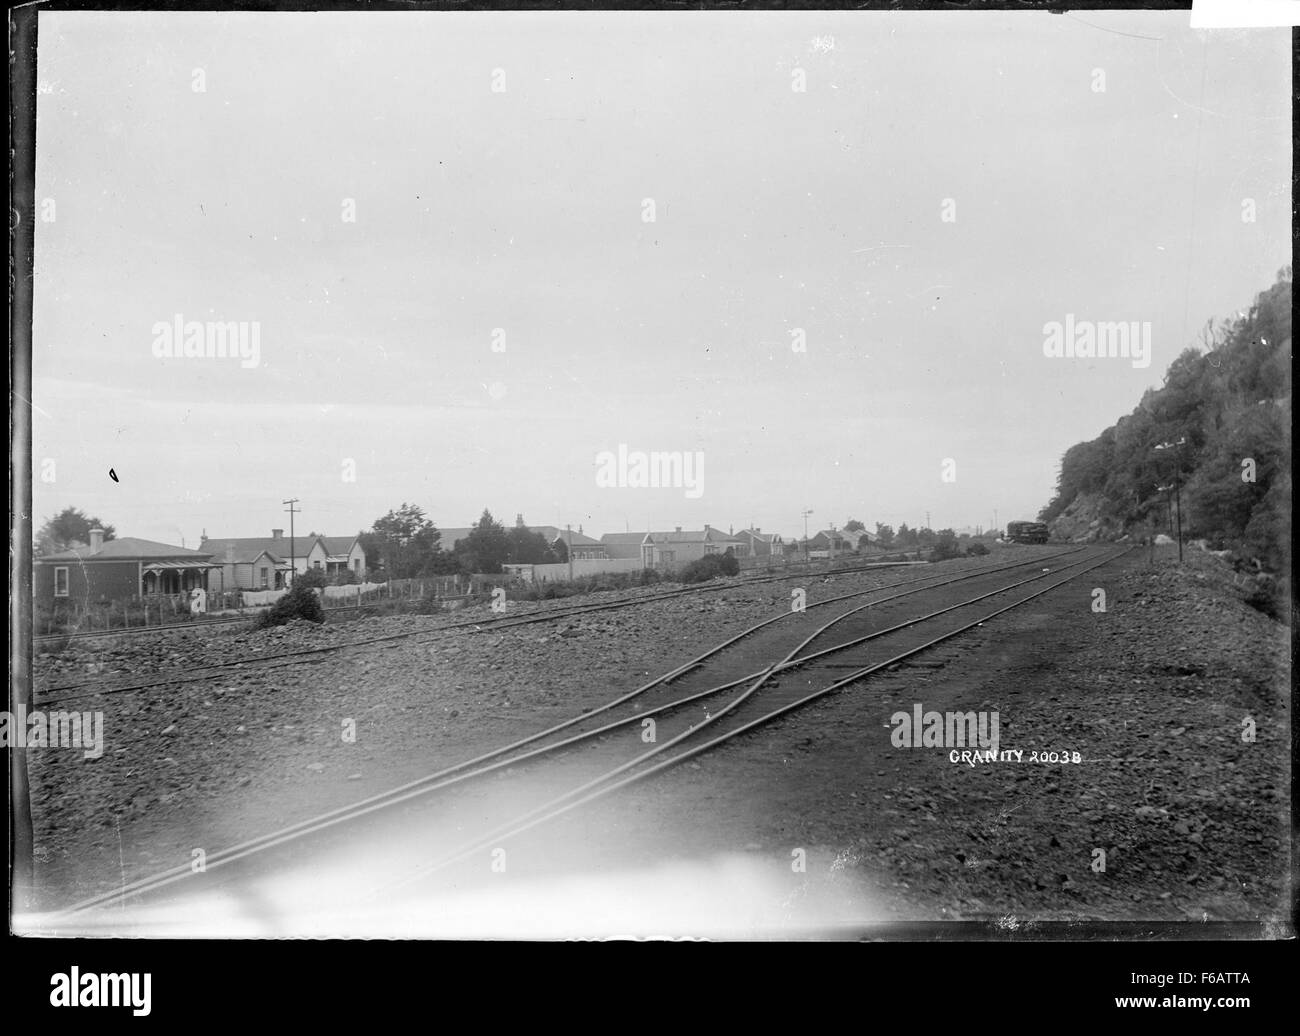 View of the railway sidings at Granity Stock Photo